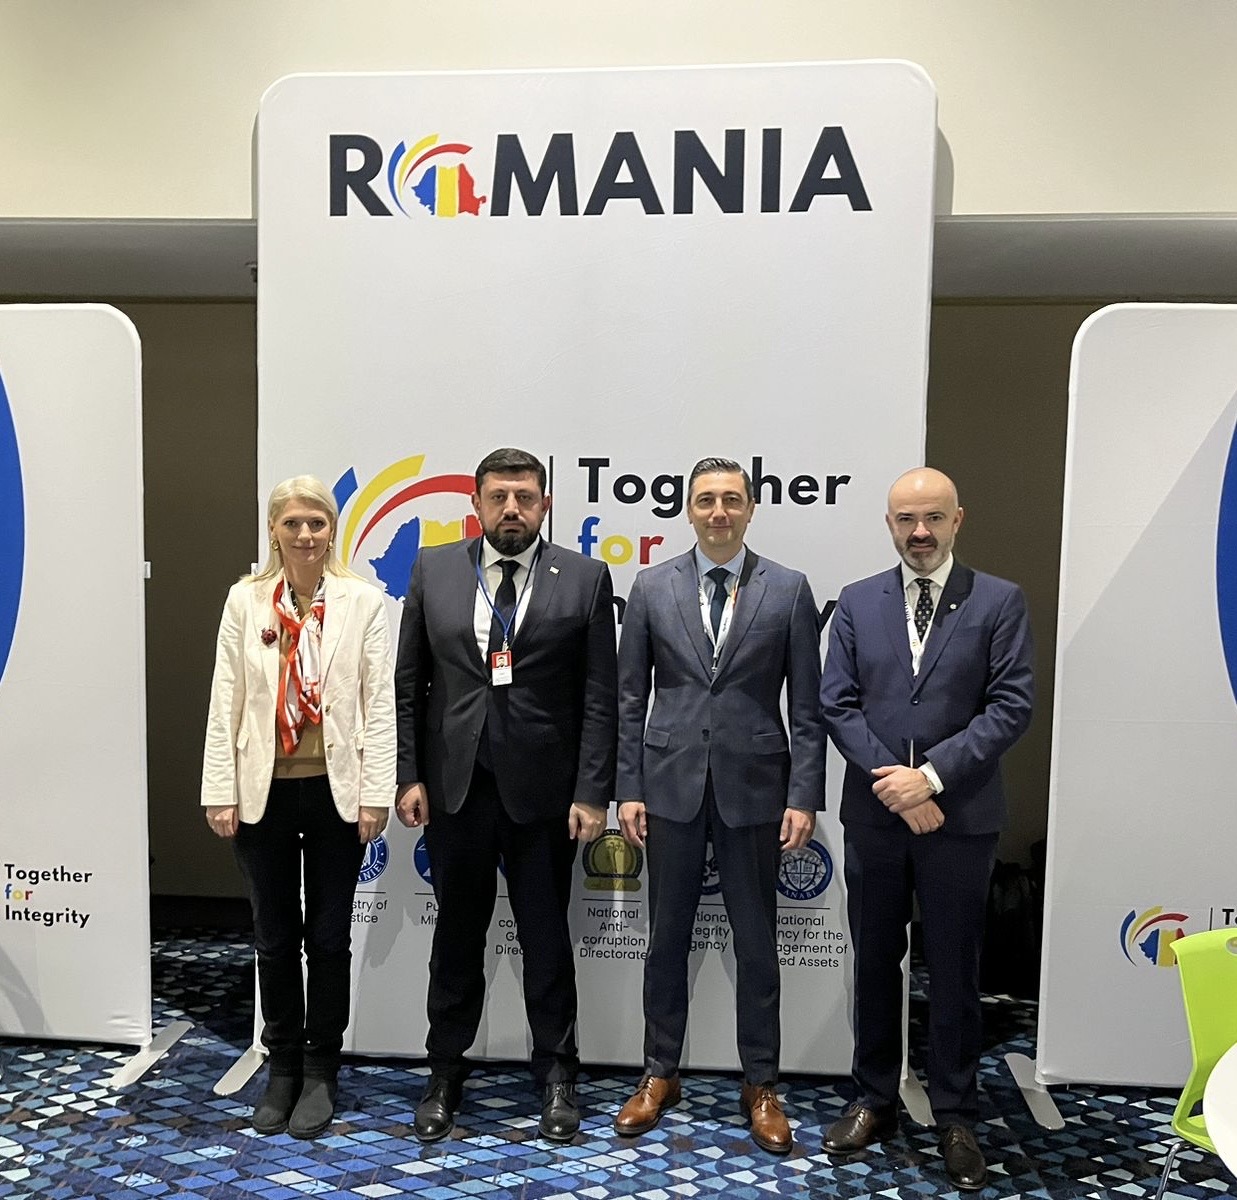 Razhden Kuprashvili met with key Romanian officials: Alex Florenta, the General Prosecutor of Romania; Alina Gorghius, the Minister of Justice of Romania; and Florin-Ionel Moises, the President of the National Integrity Agency of Romania